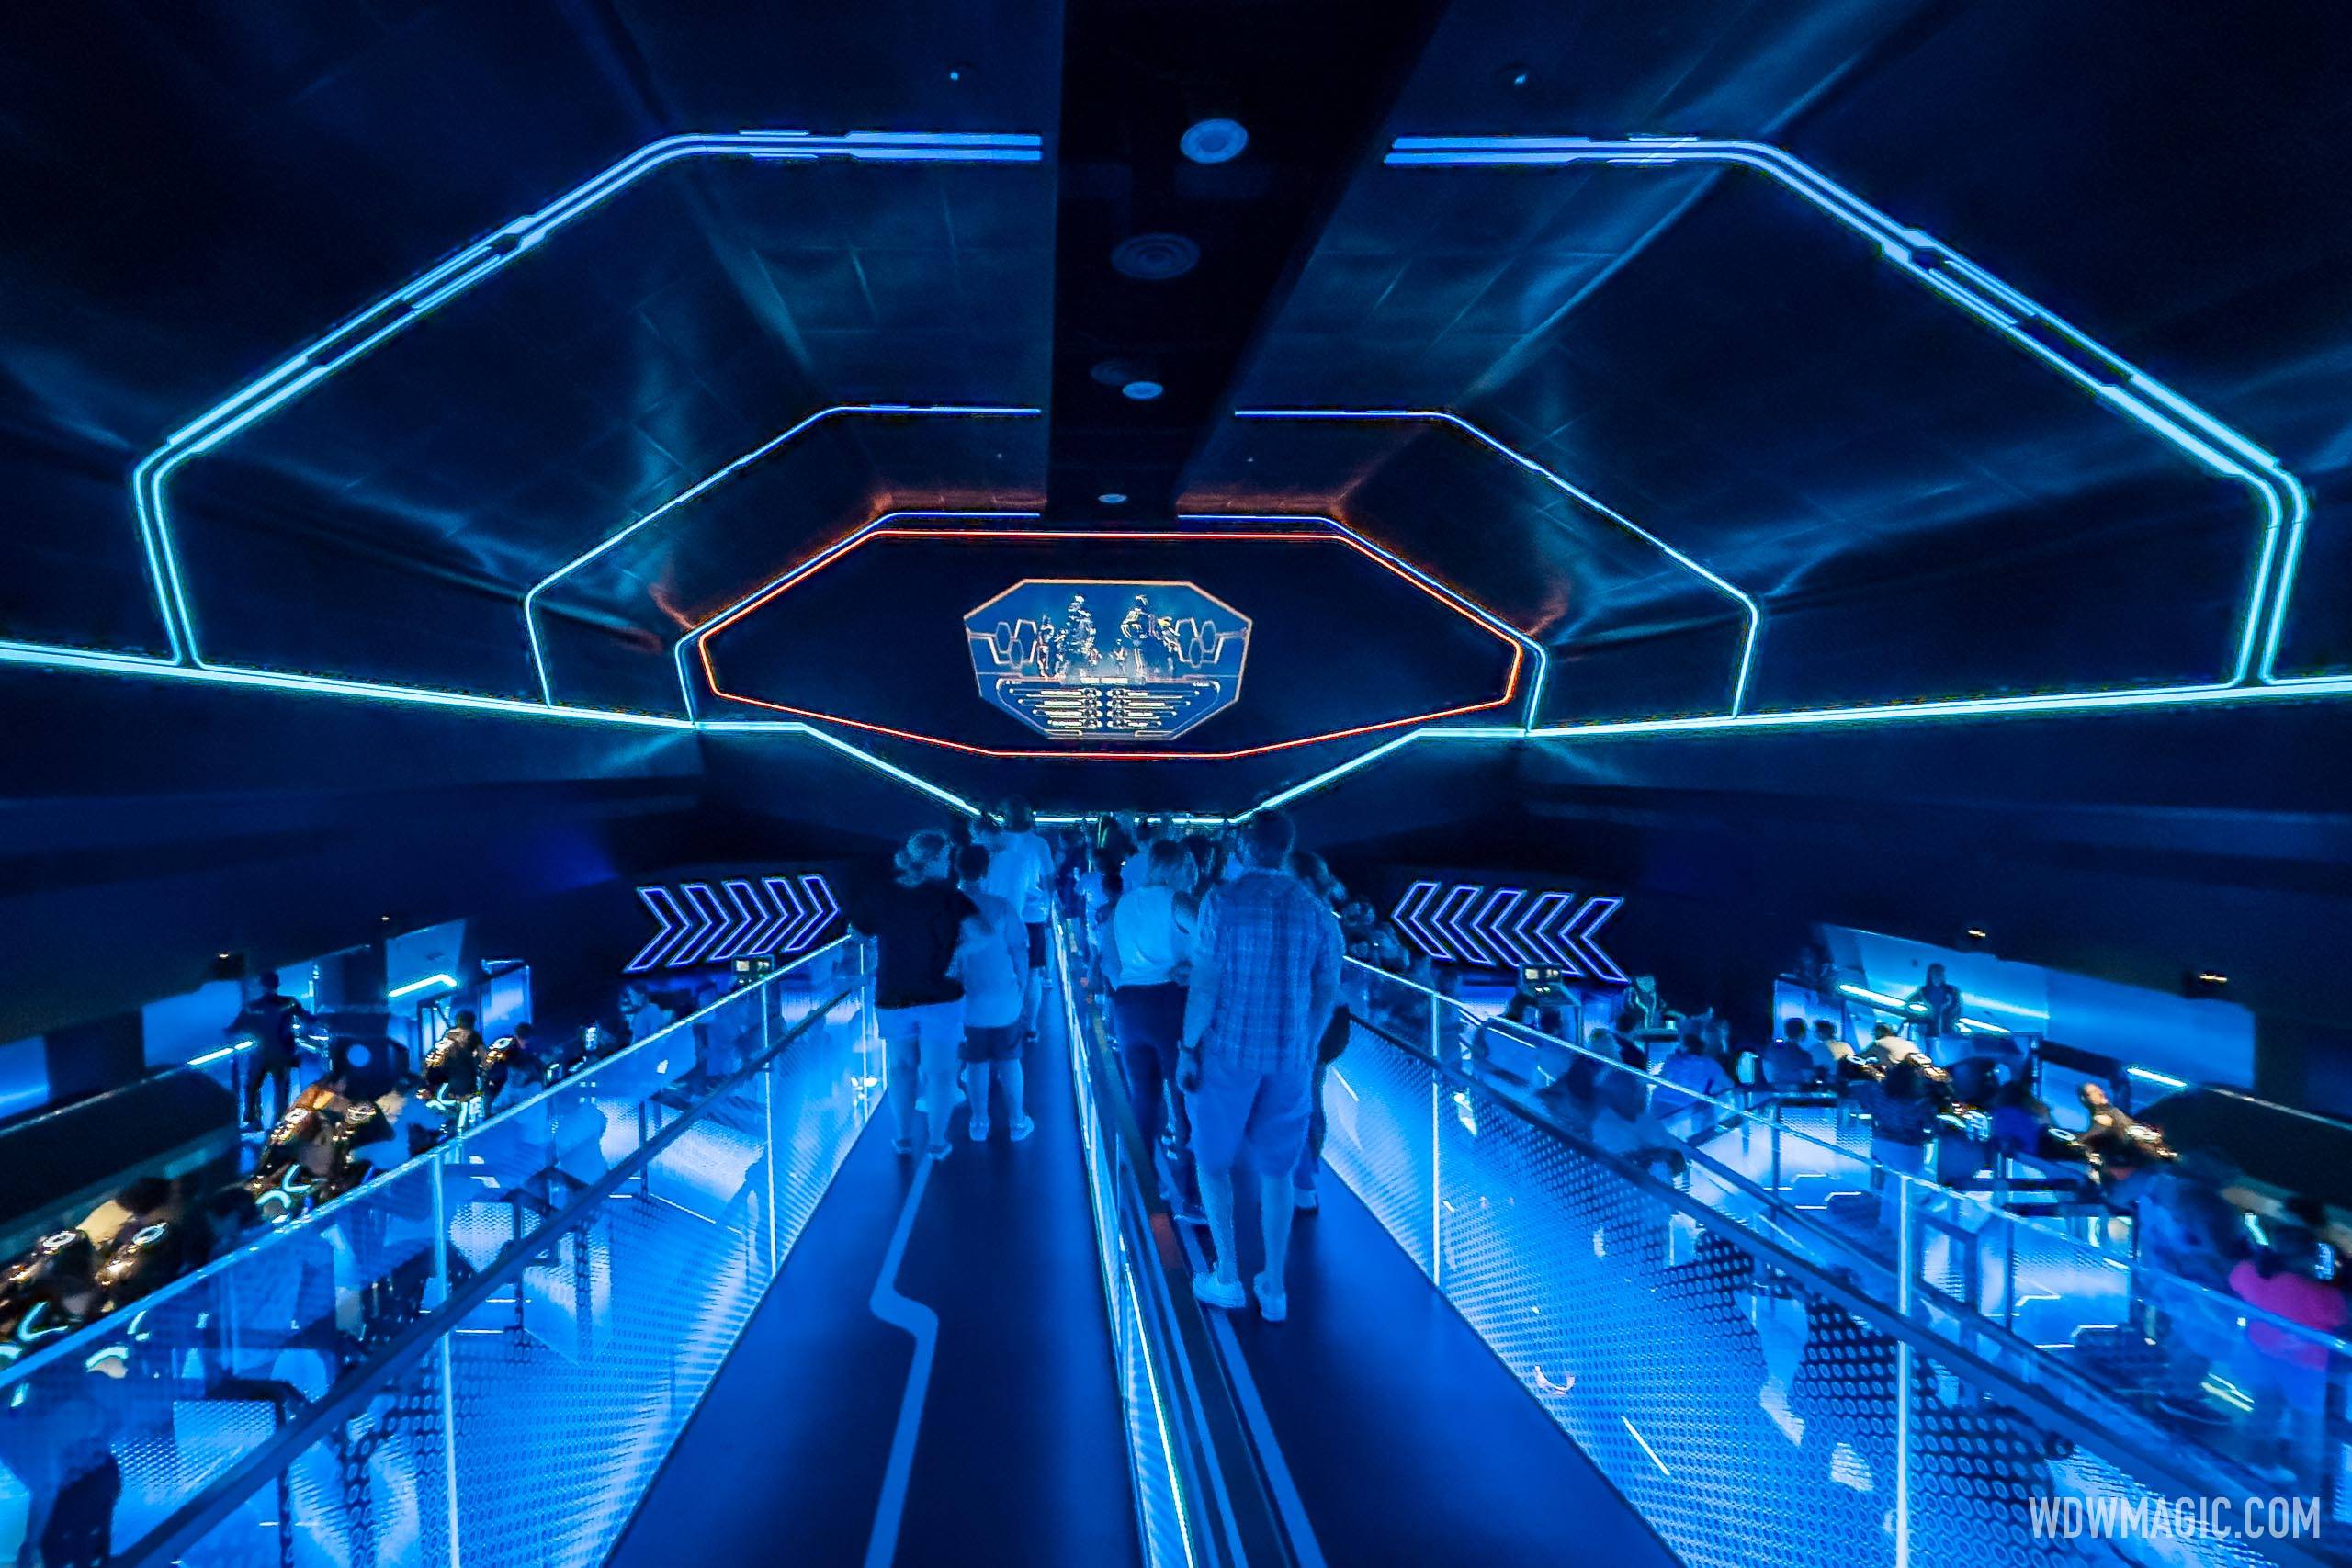 Wide view of the TRON Lightcycle Run boarding area